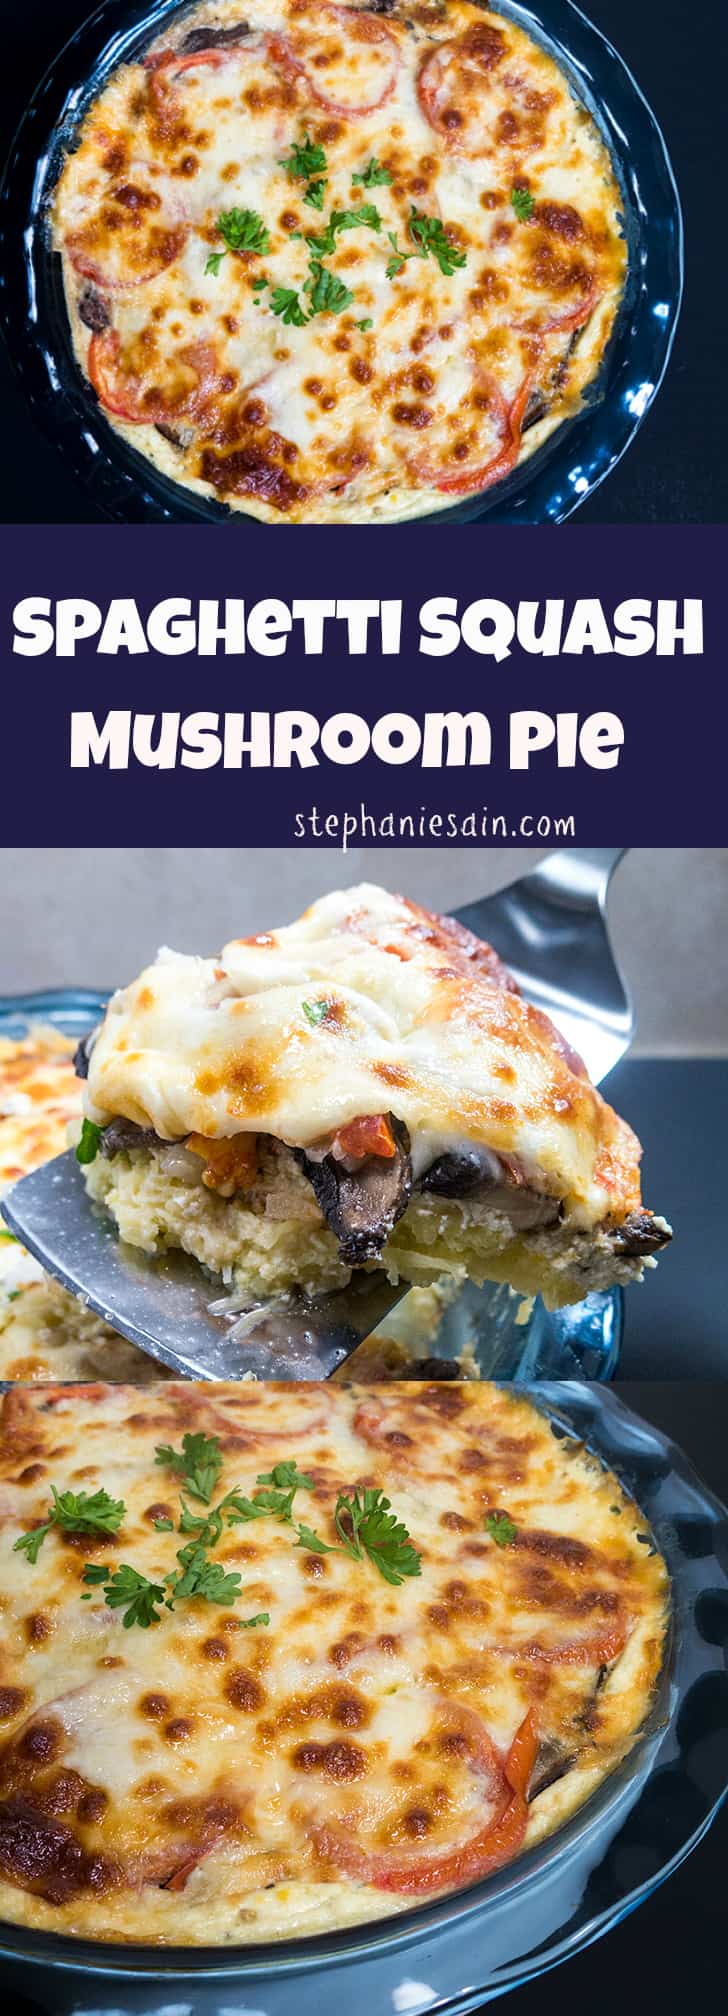 Spaghetti Squash Mushroom Pie is a healthy, tasty pie that you can feel good about eating seconds. Vegetarian and Gluten Free.